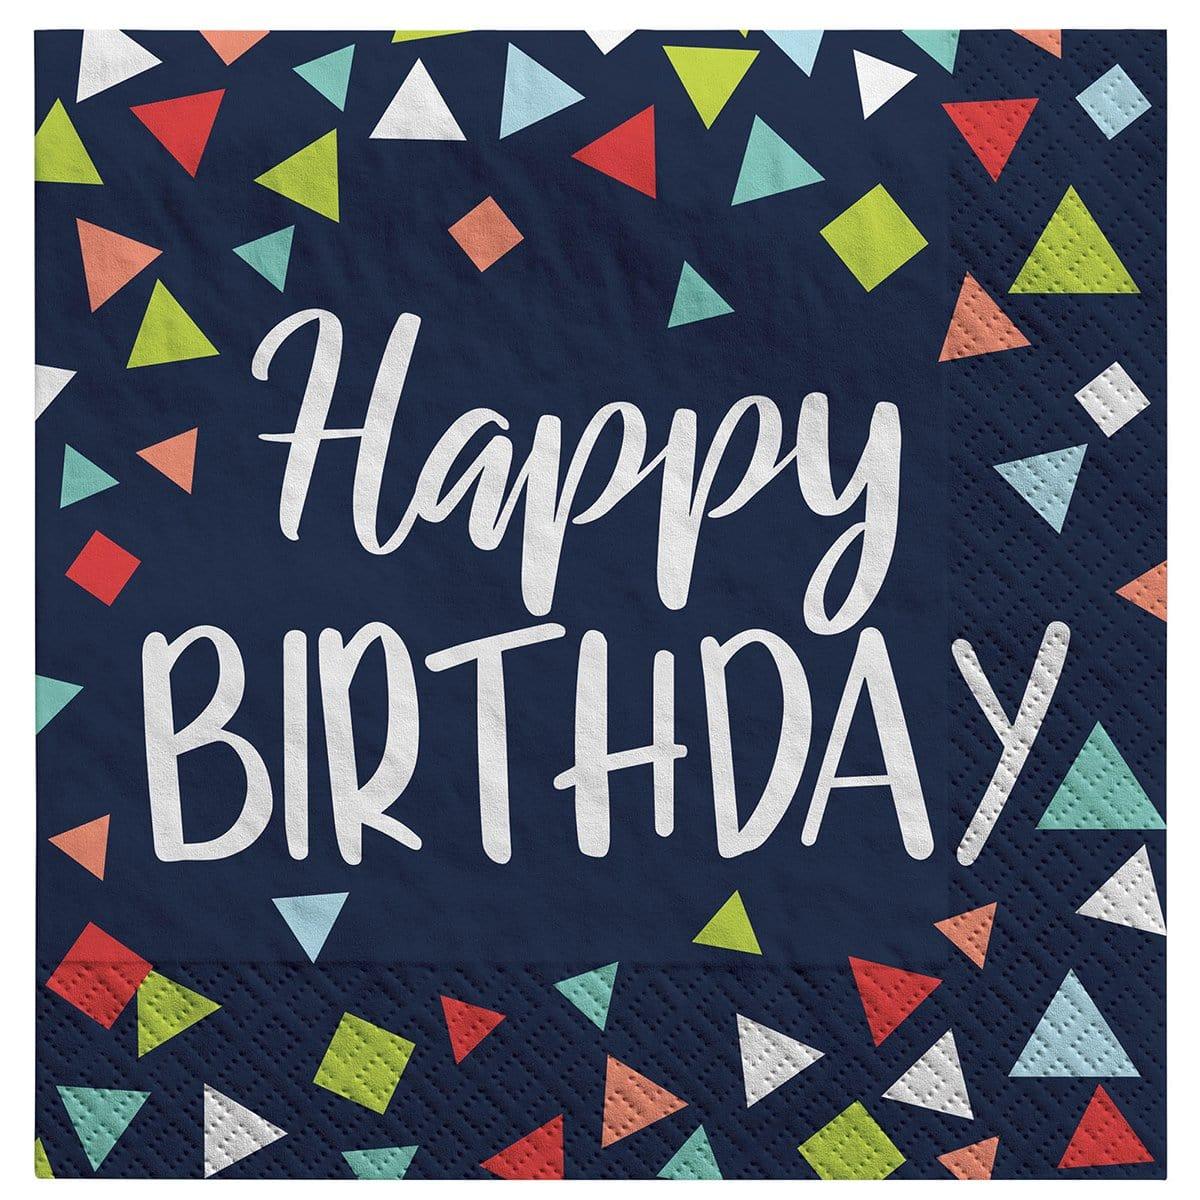 Buy General Birthday A Reason To Celebrate - Lunch Napkins 16 Per Package sold at Party Expert